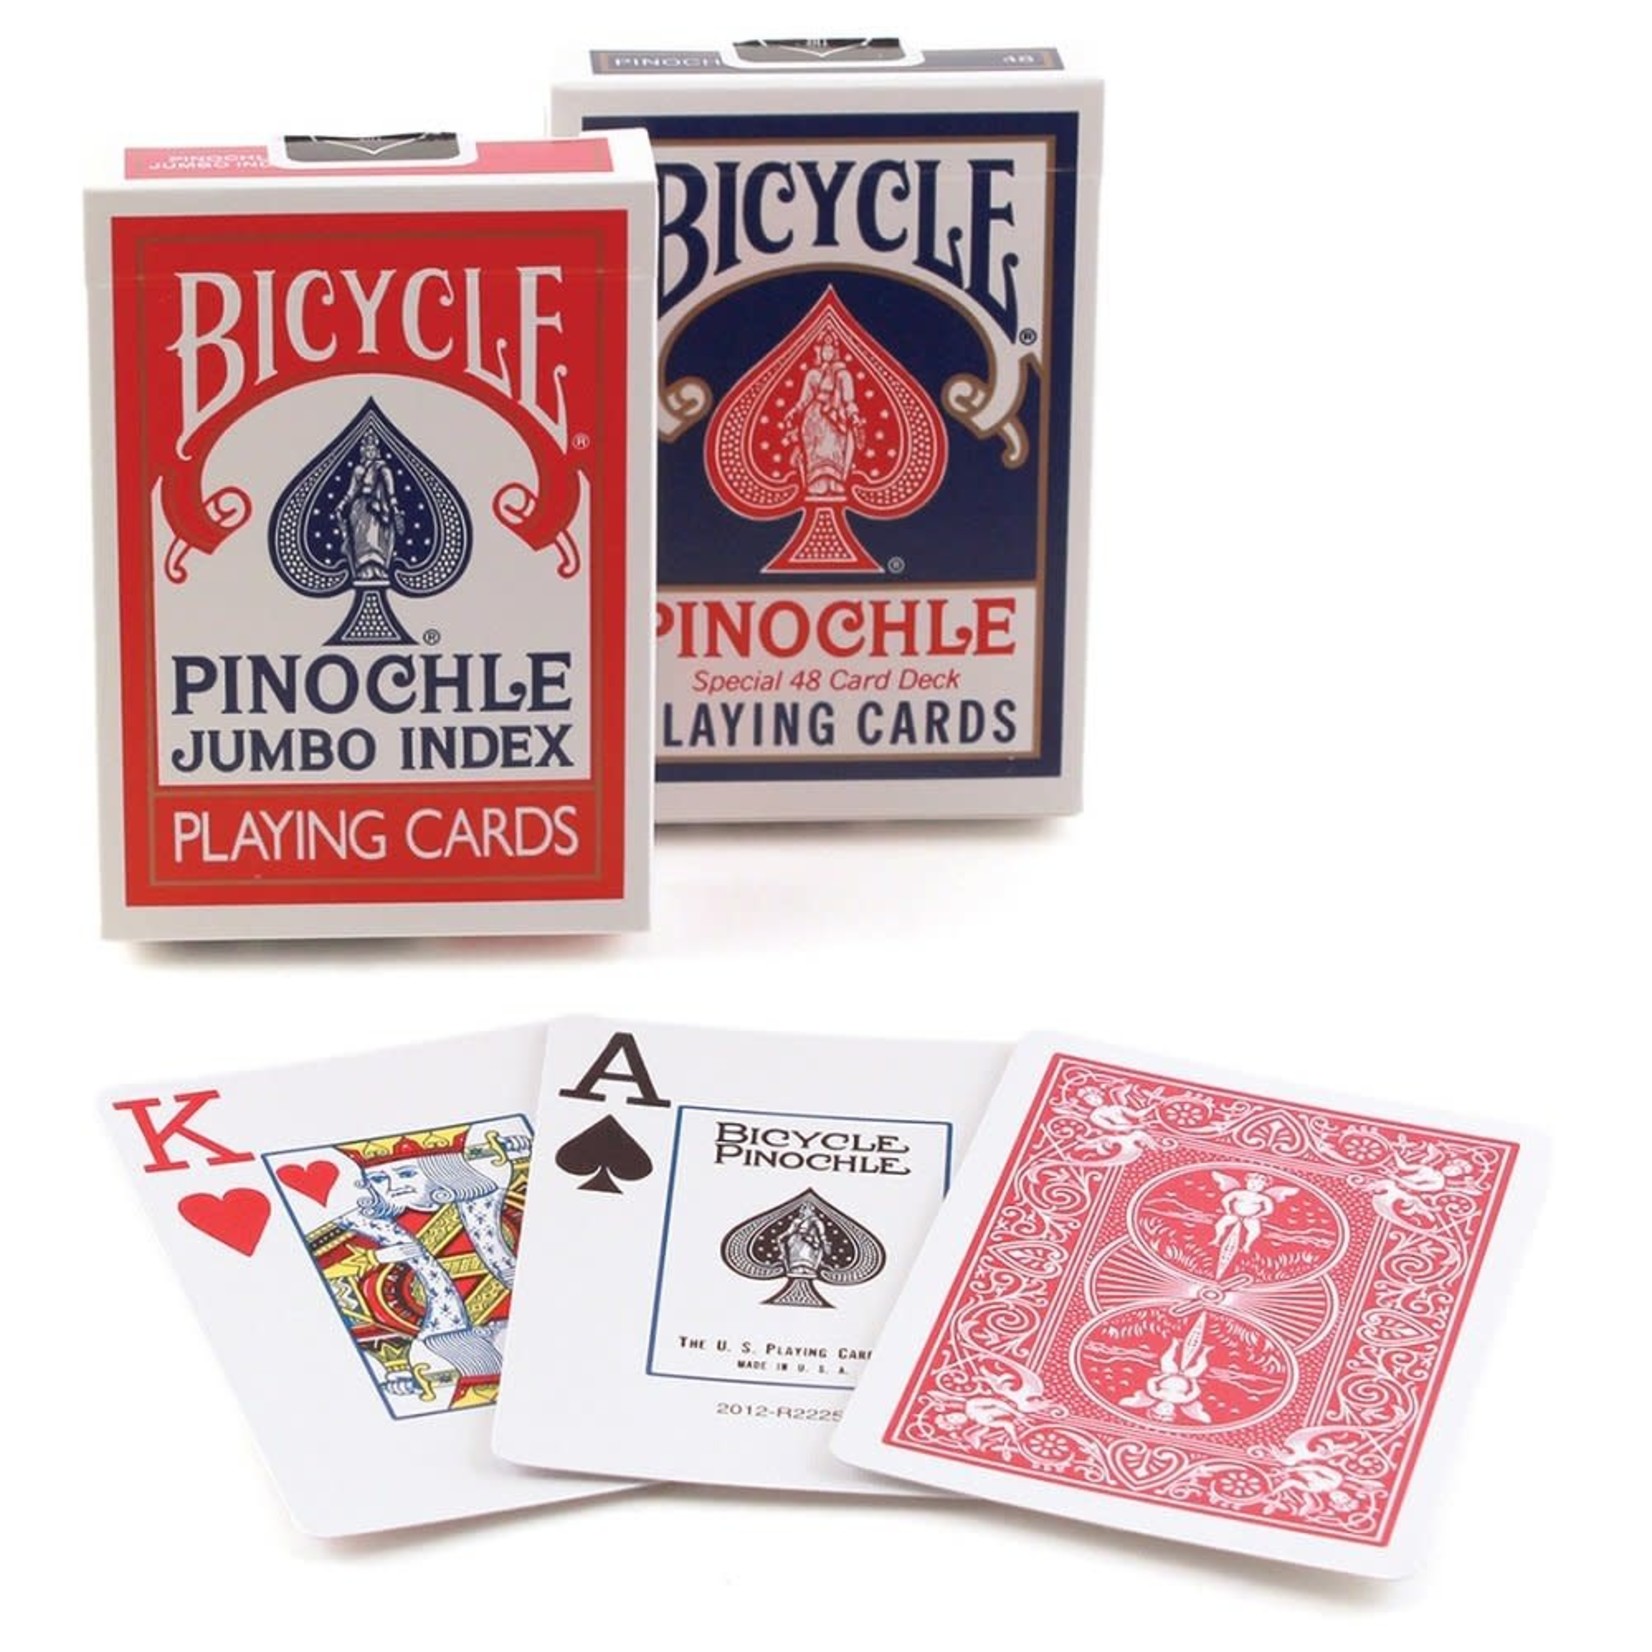 The United States Playing Card Company Bicycle Pinochle Jumbo Index